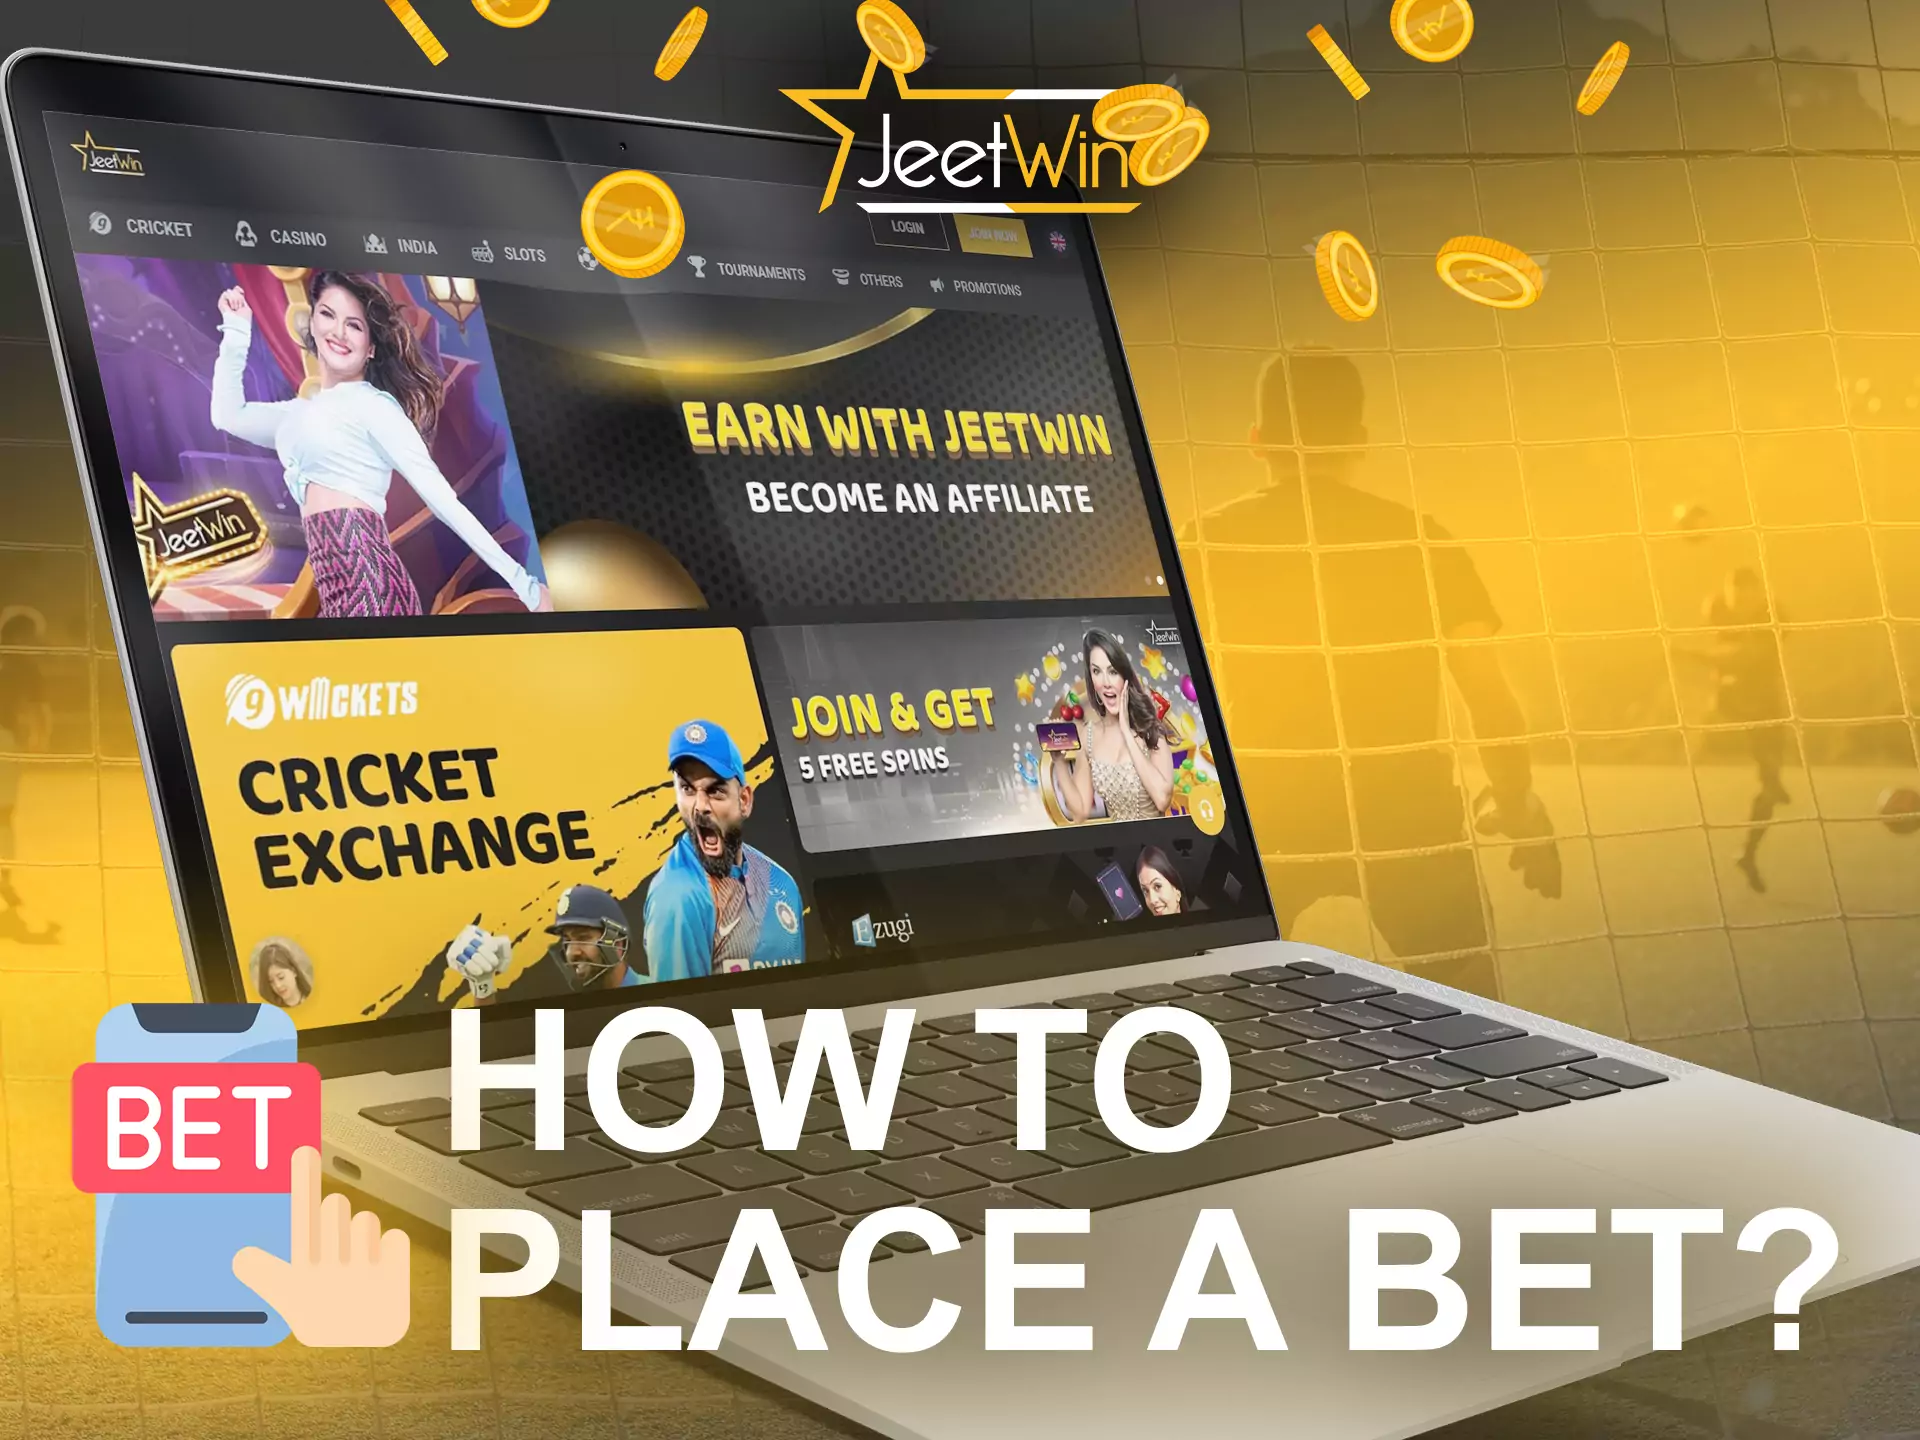 Use the instructions and place bets with JeetWin.